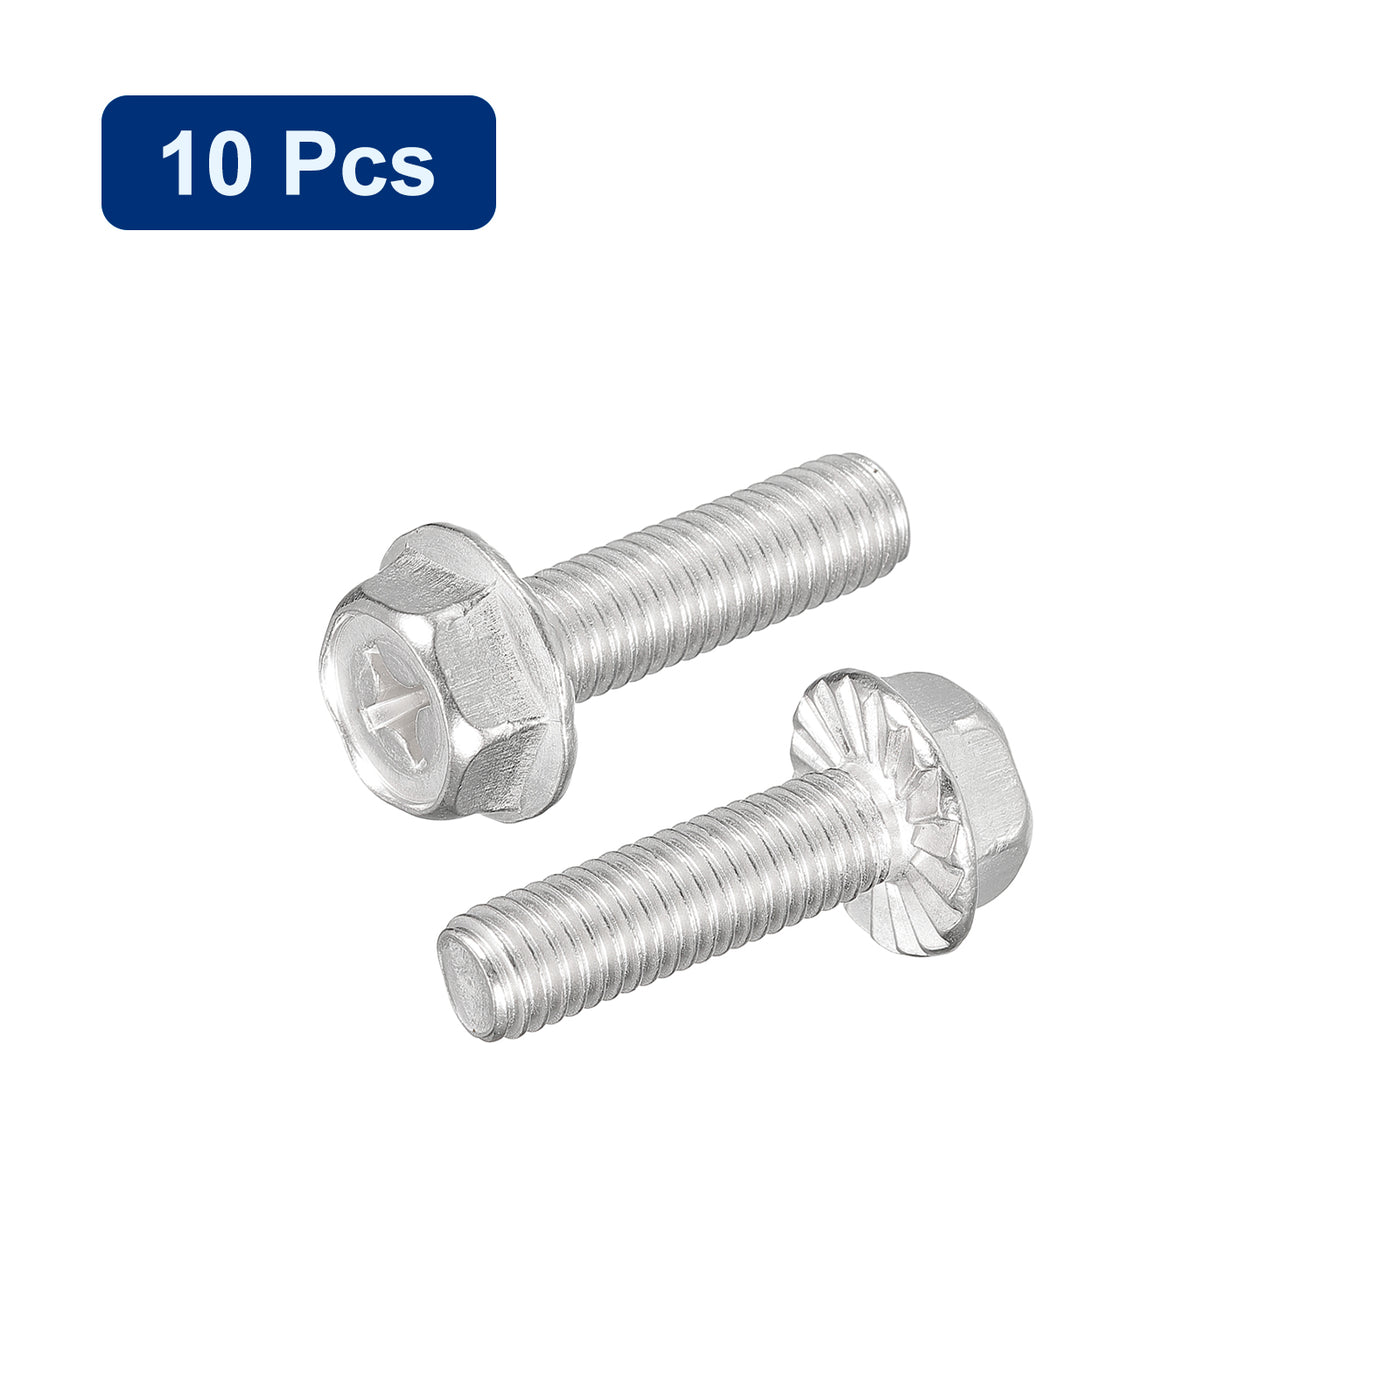 uxcell Uxcell M8x30mm Phillips Hex Head Flange Bolts, 10pcs 304 Stainless Steel Screws